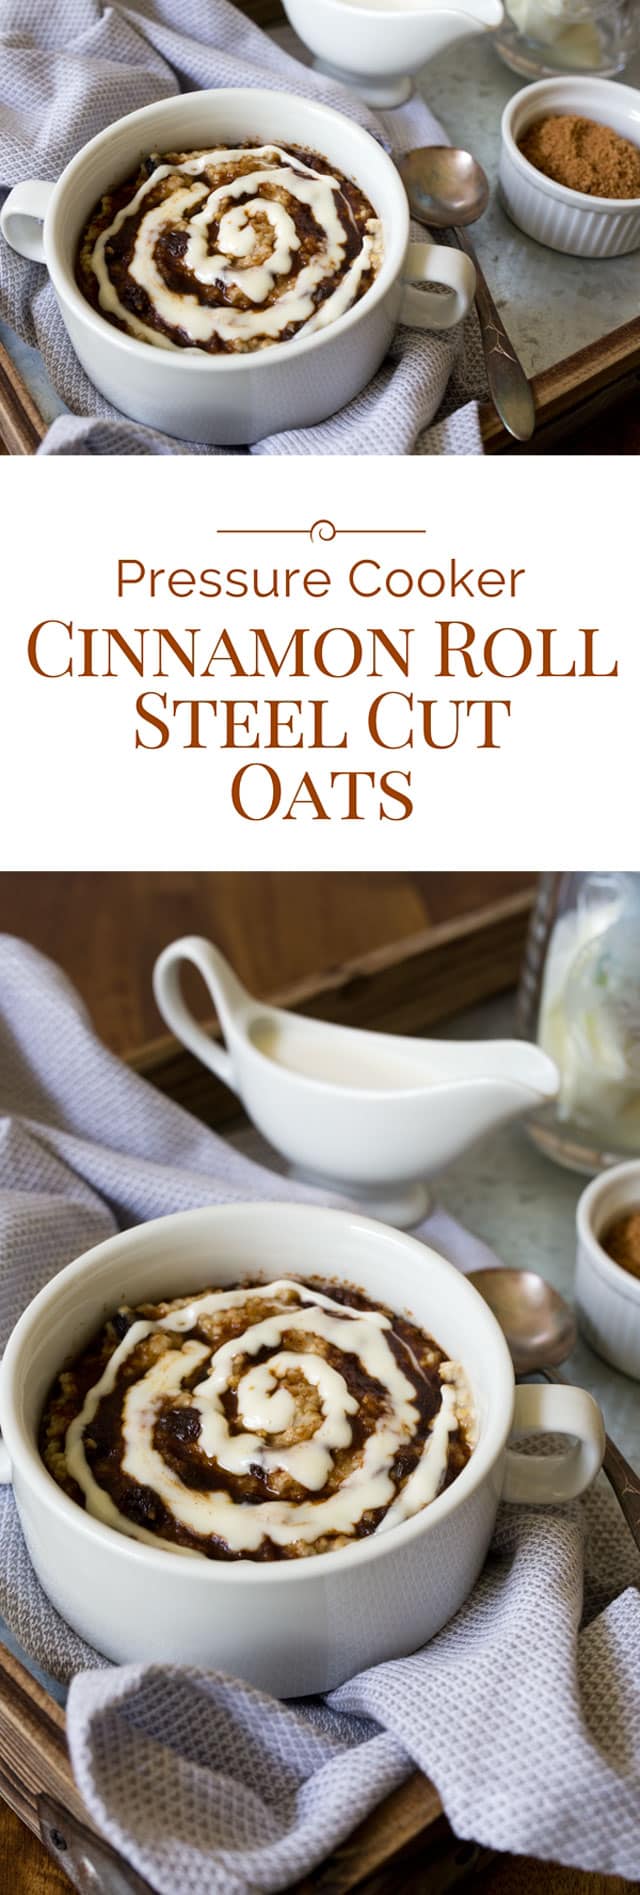 Cinnamon roll steel cut oats is a delicious and sweet baked oatmeal topped with brown sugar cinnamon and a swirl of cream cheese icing, made in an Instant Pot electric pressure cooker. Why have plain boring oatmeal when you can make this baked cinnamon roll steel cut oatmeal recipe? #instantpot #pressurecooker #pressurecooking #breakfast #oatmeal via @PressureCook2da